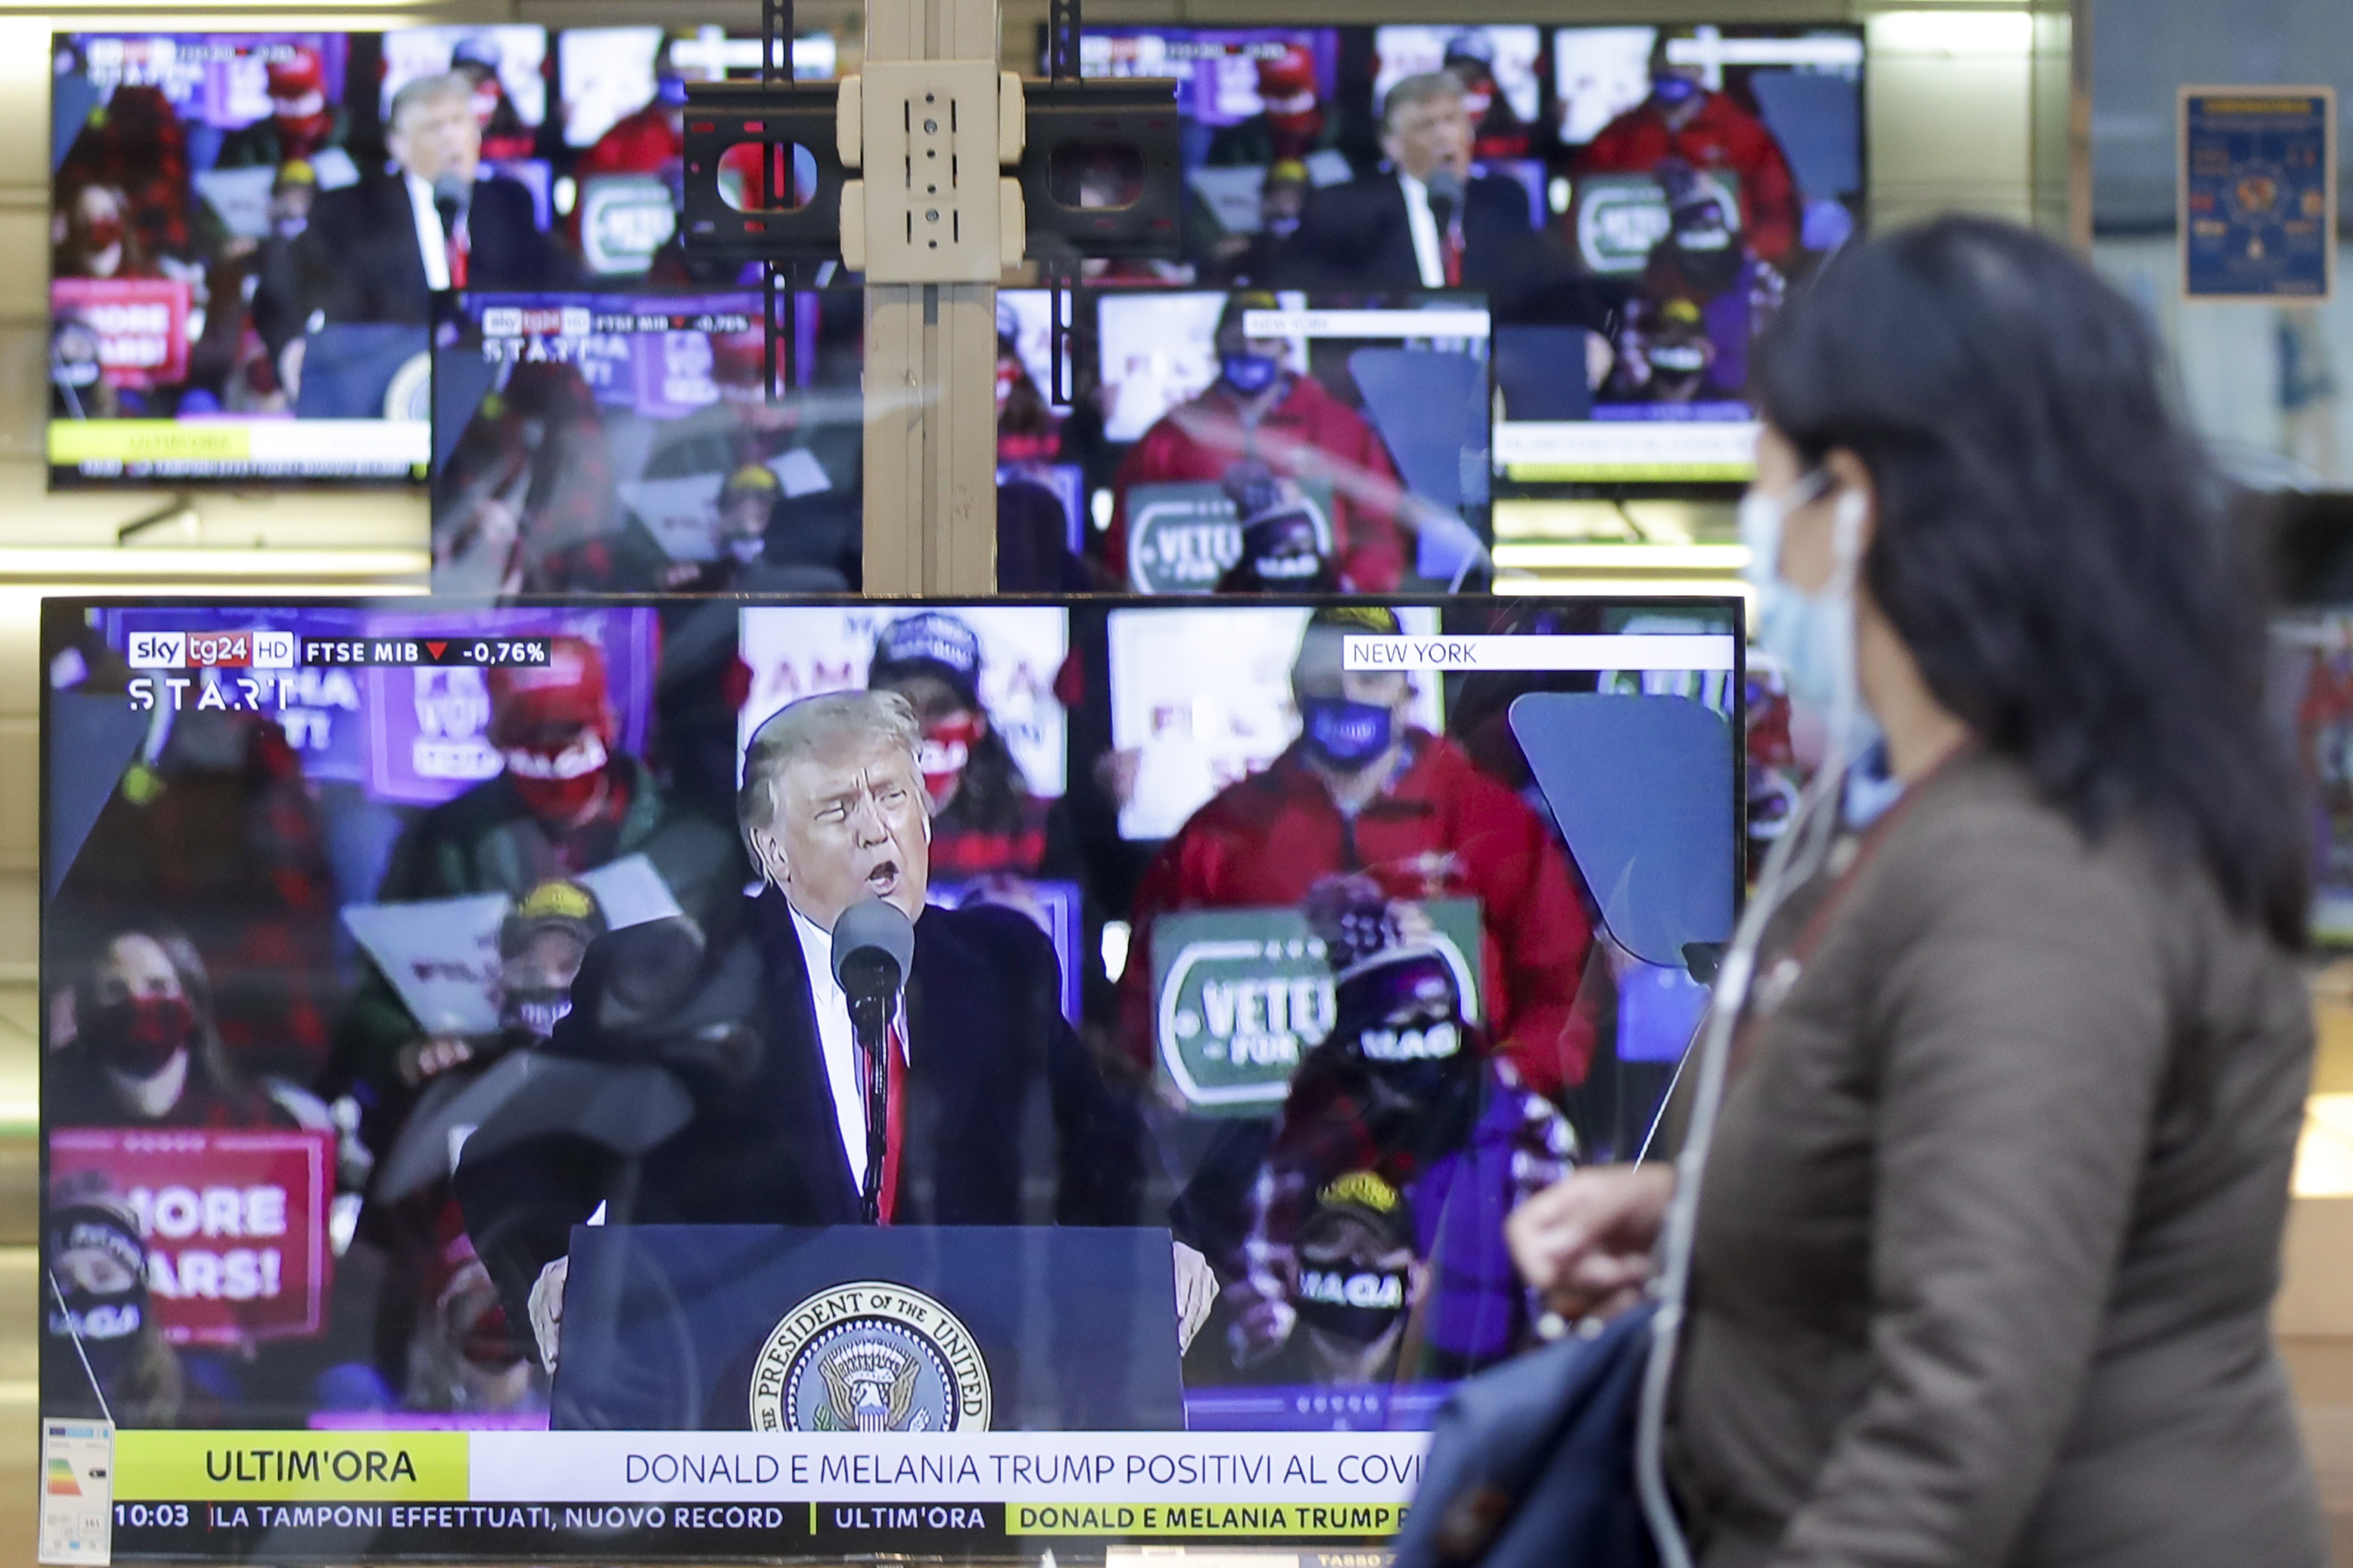 A woman wearing a face mask walks by the window of a shop with TV screens showing an image of U.S. President Donald Trump during a news program, in Milan, Friday, Oct. 2, 2020. Trump said early Friday that he and first lady Melania Trump have tested positive for the coronavirus, a stunning announcement that plunges the country deeper into uncertainty just a month before the presidential election. (AP Photo/Luca Bruno)